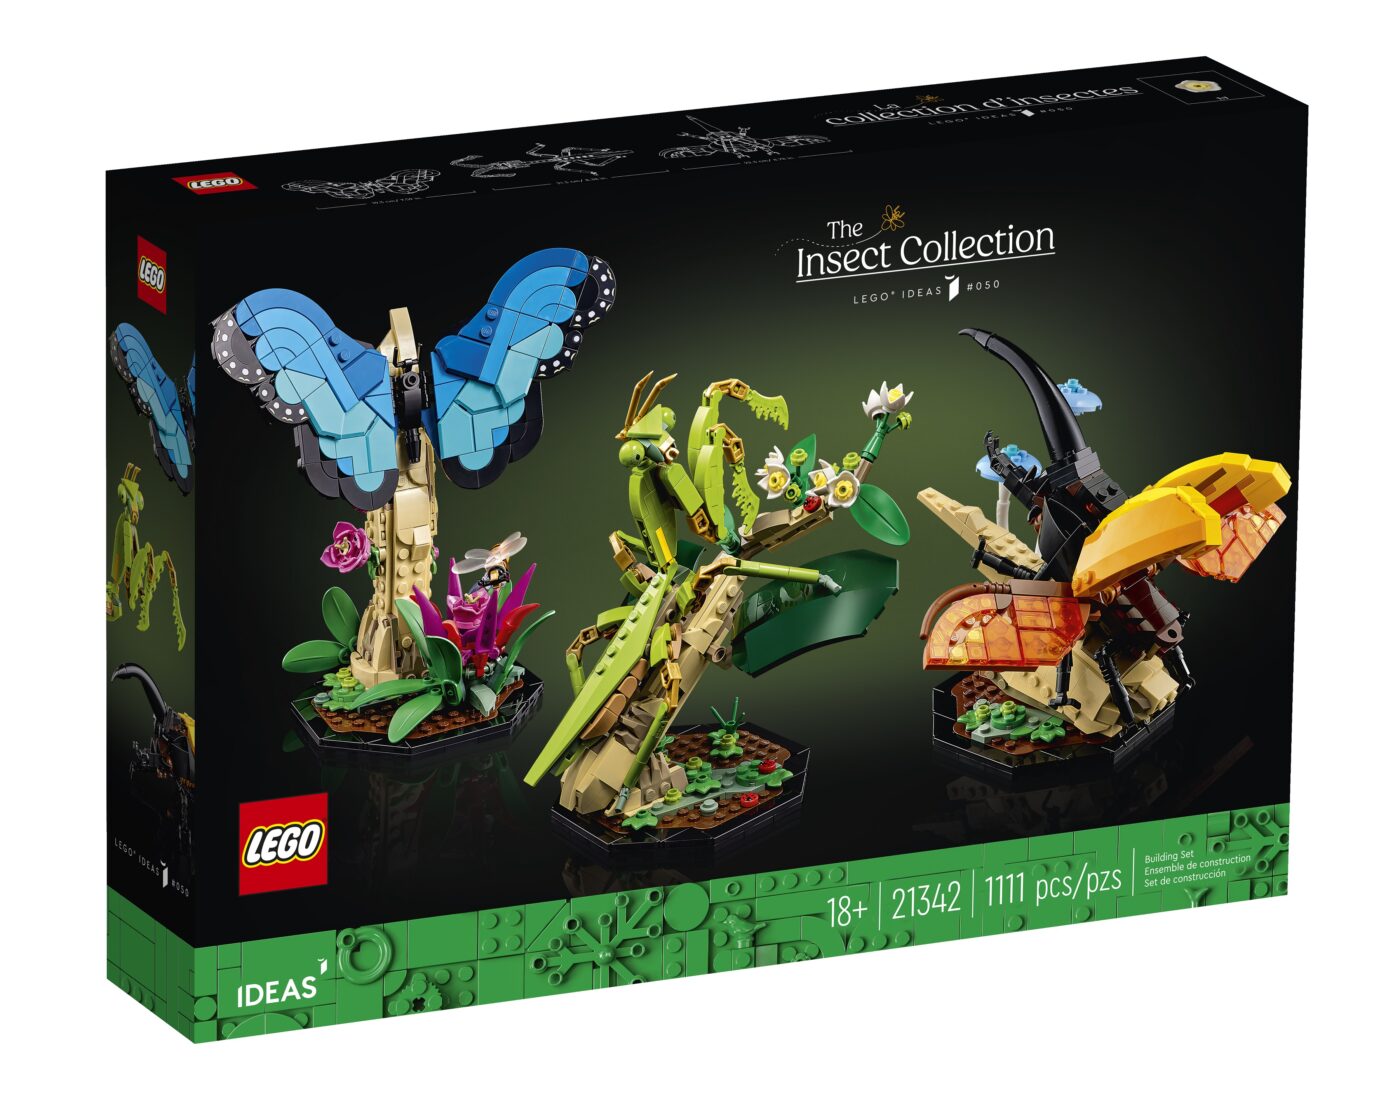 21342 LEGO Insect Collection Box